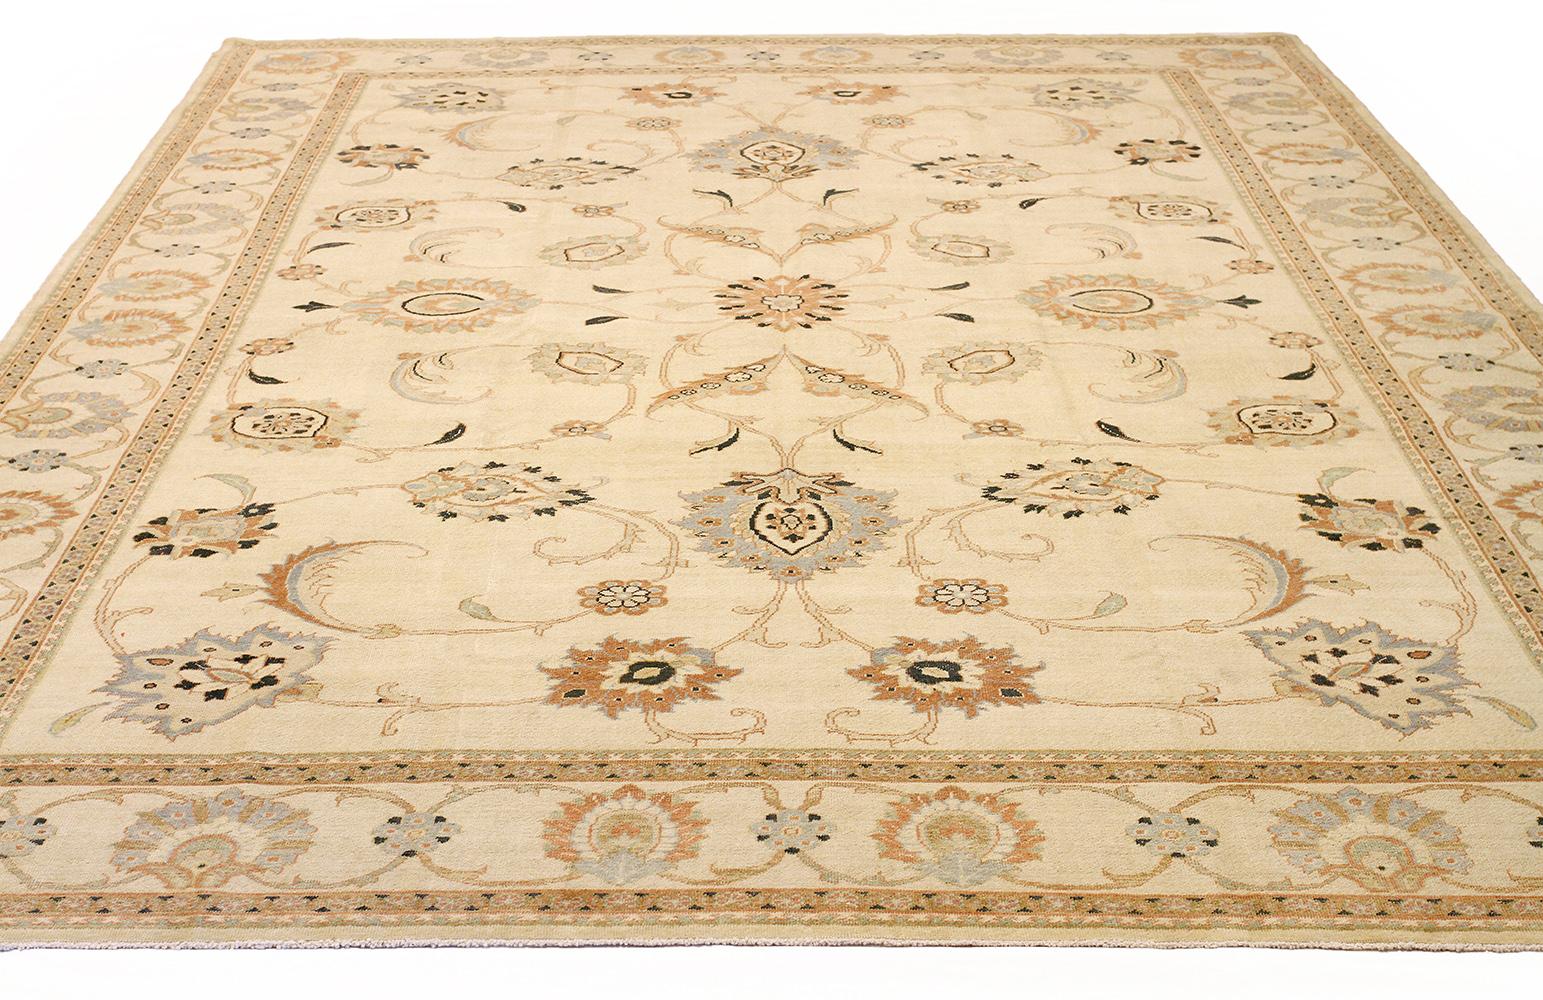 New handmade Persian area rug from high-quality sheep’s wool and colored with eco-friendly vegetable dyes that are proven safe for humans and pets alike. It’s a traditional Sultanabad design showcasing a regal ivory field with prominent Herati